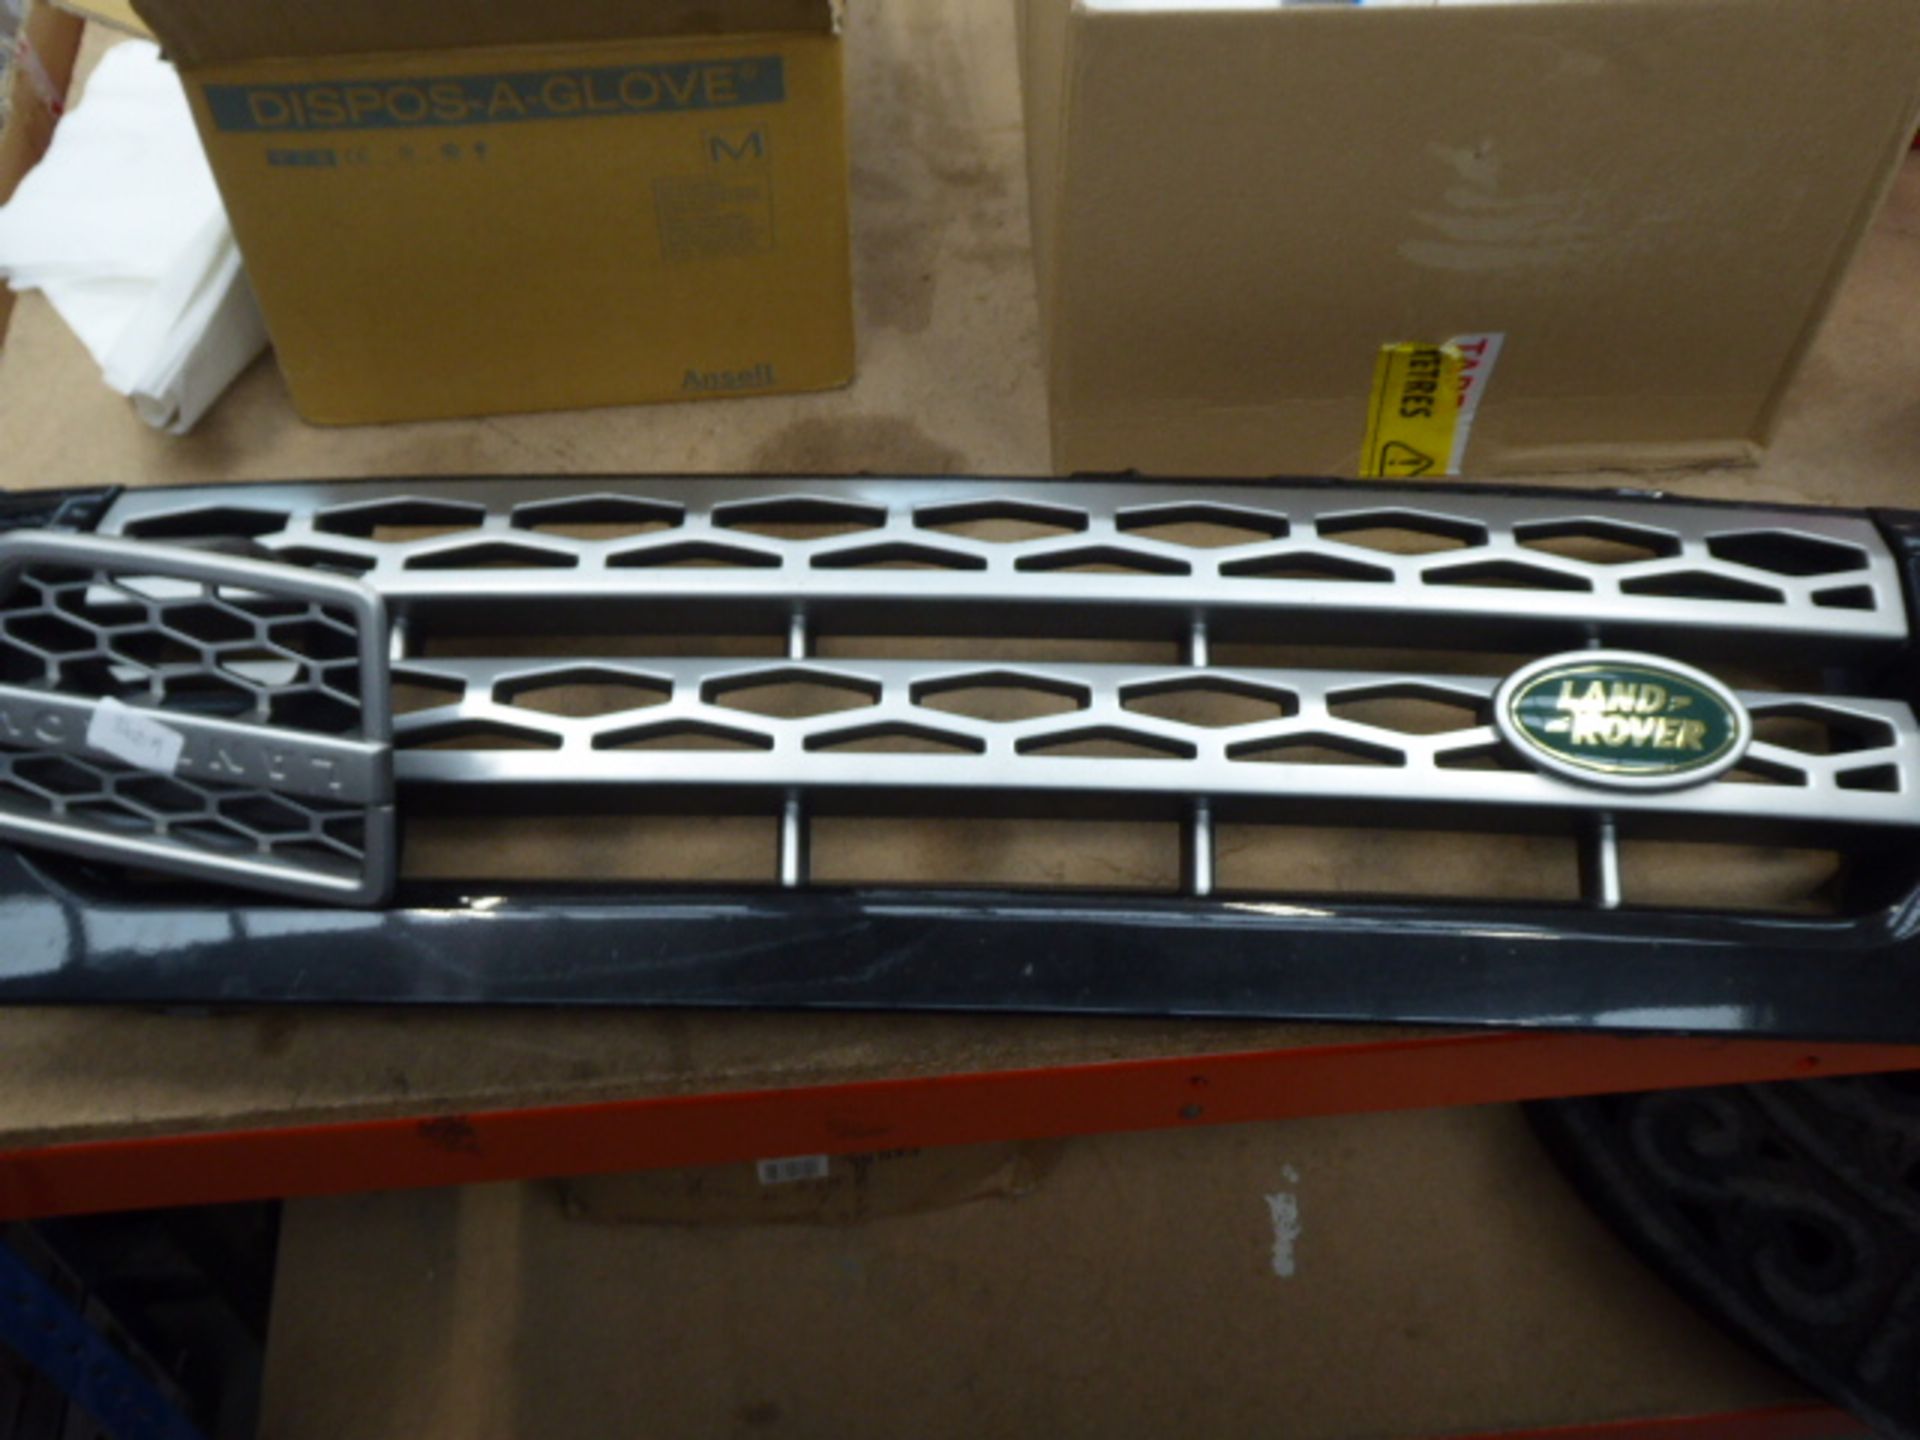 Landrover grill and side pods - Image 2 of 2